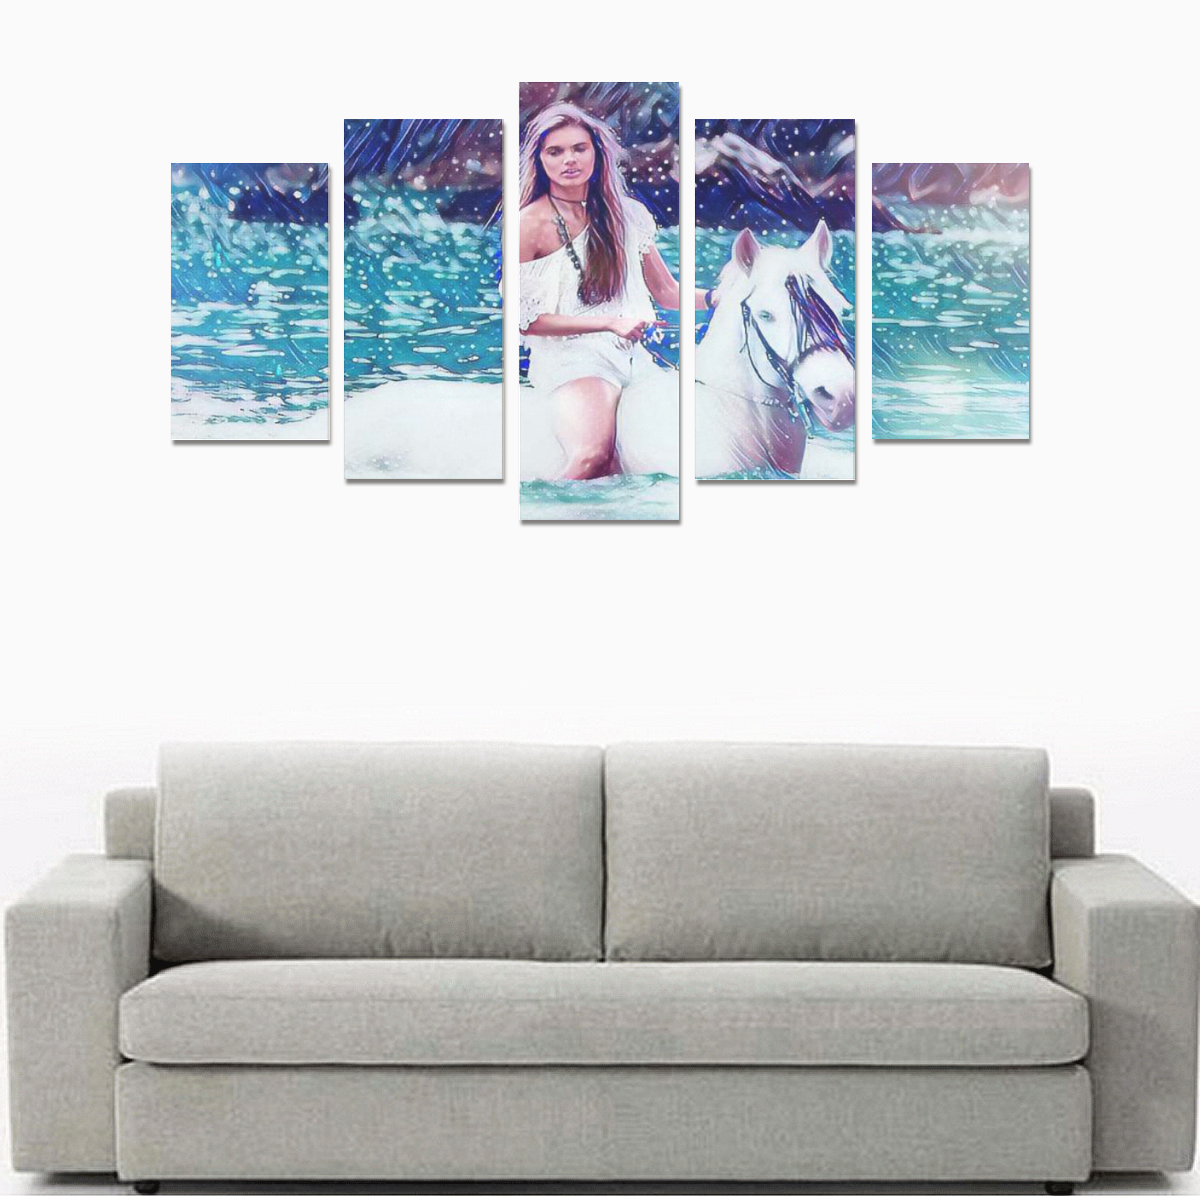 Horse and Girl in the Sea Canvas Print Sets A (No Frame)